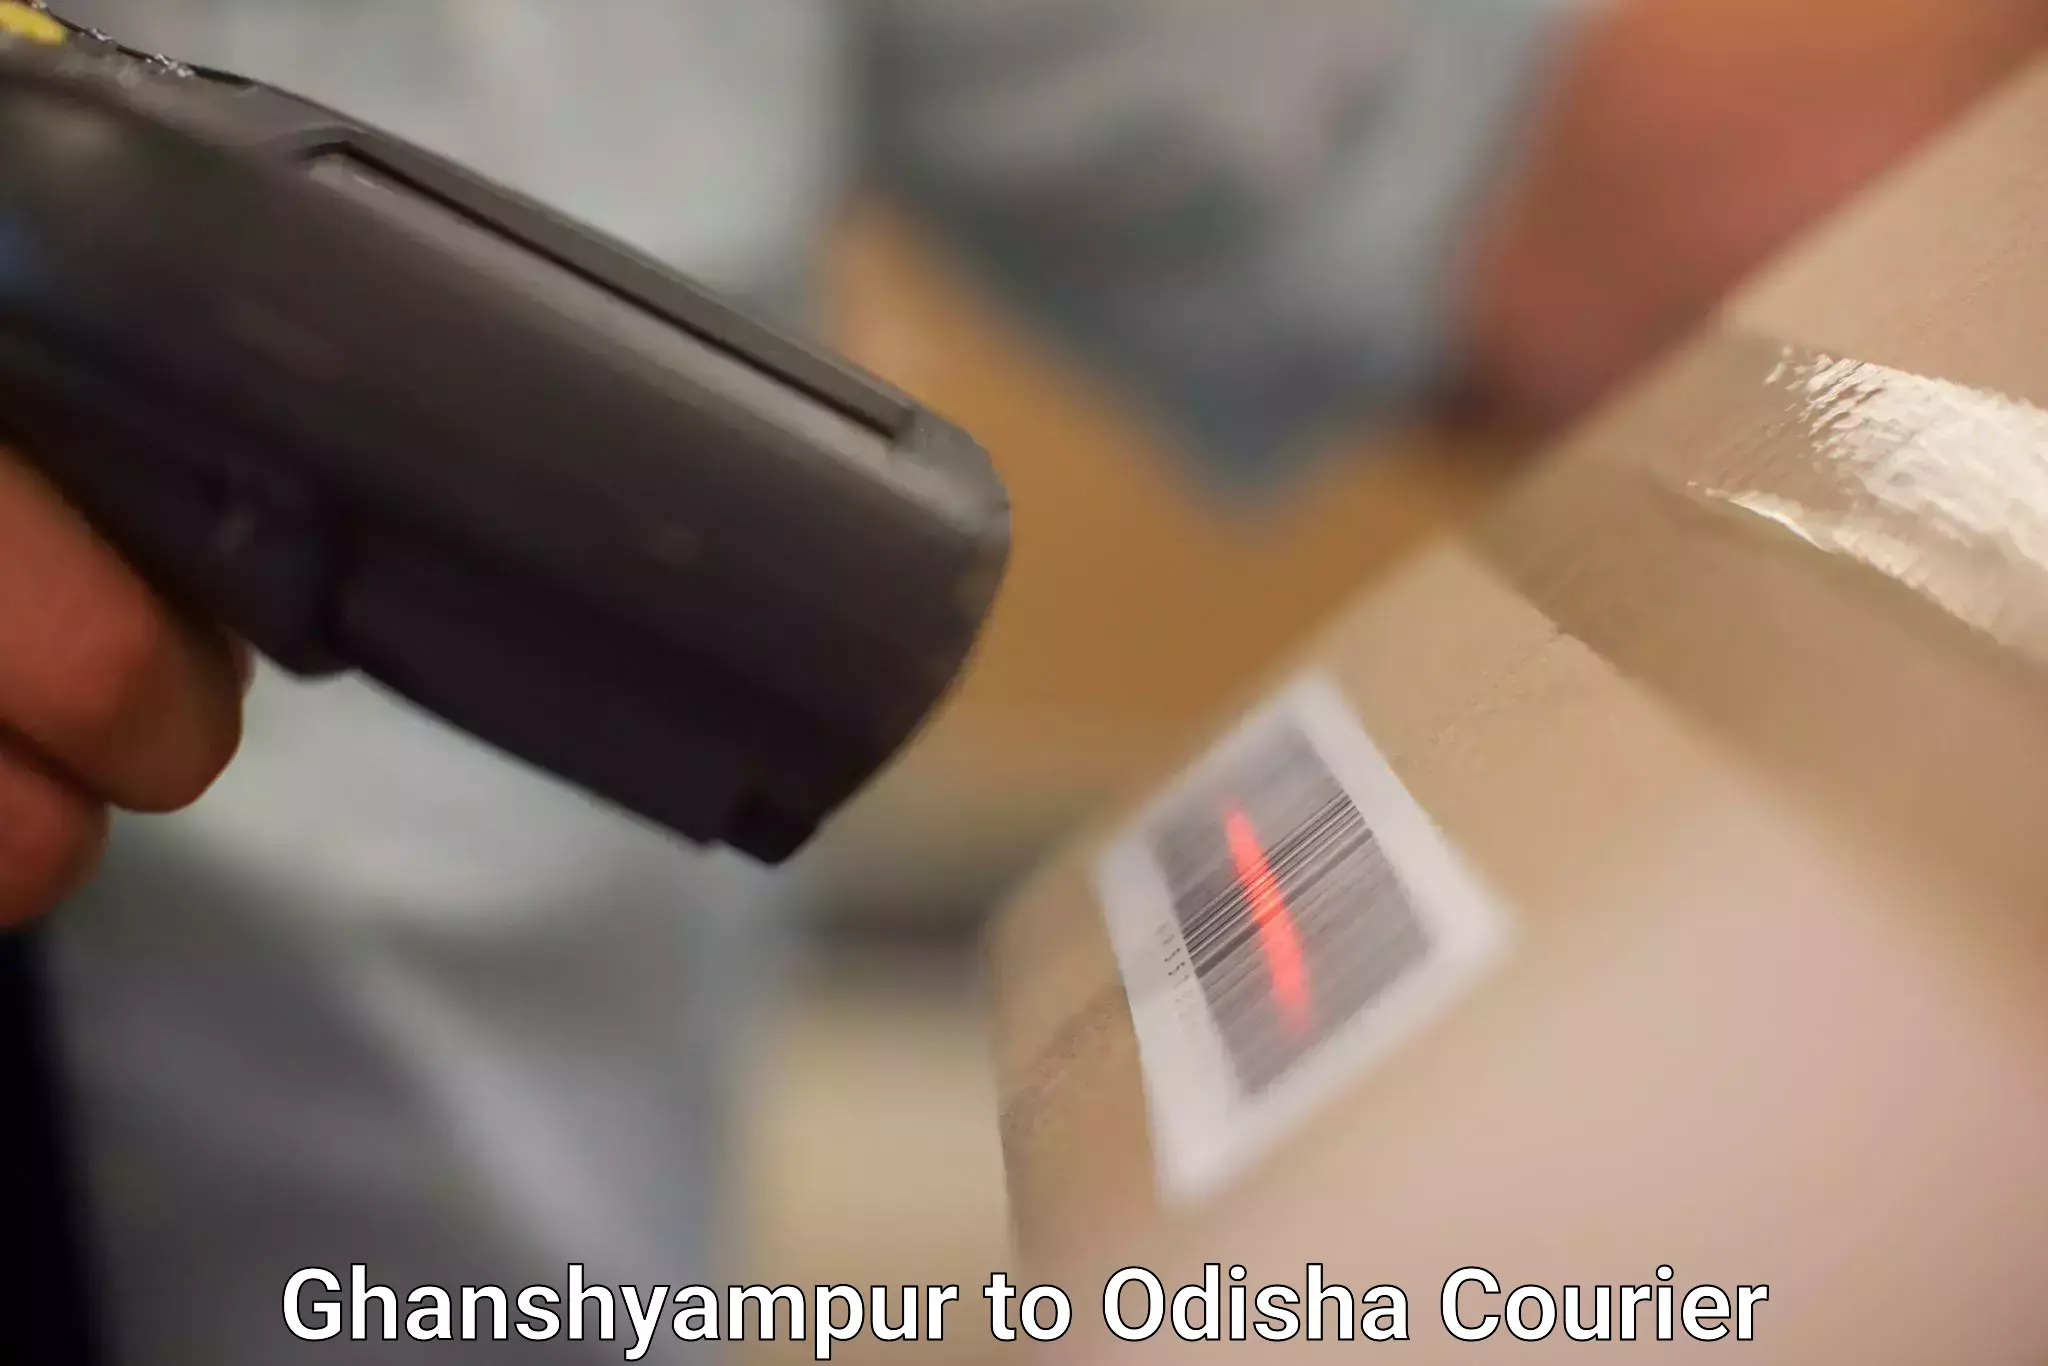 Courier service partnerships in Ghanshyampur to Chandinchowk